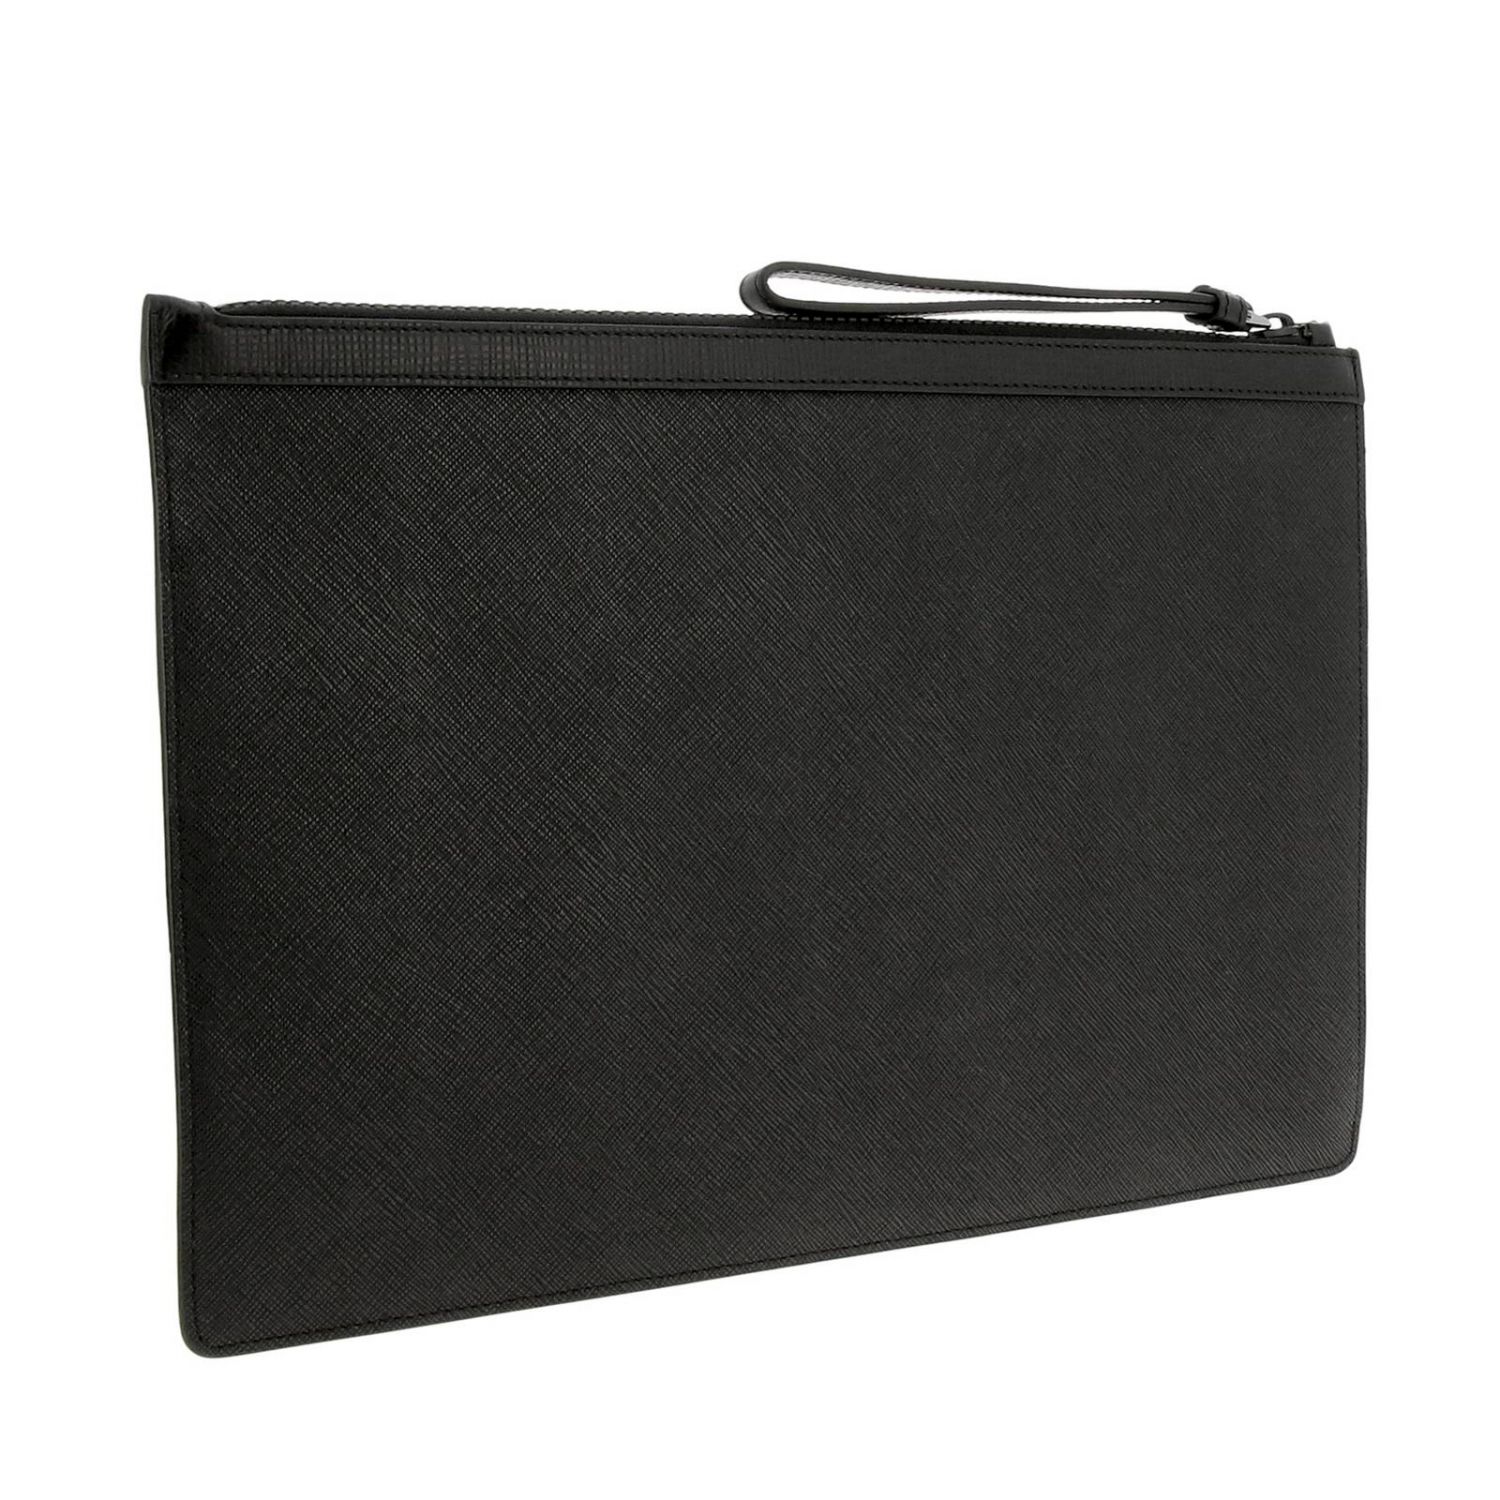 Bally Outlet: Bollis clutch bag with trainspotting band | Briefcase ...